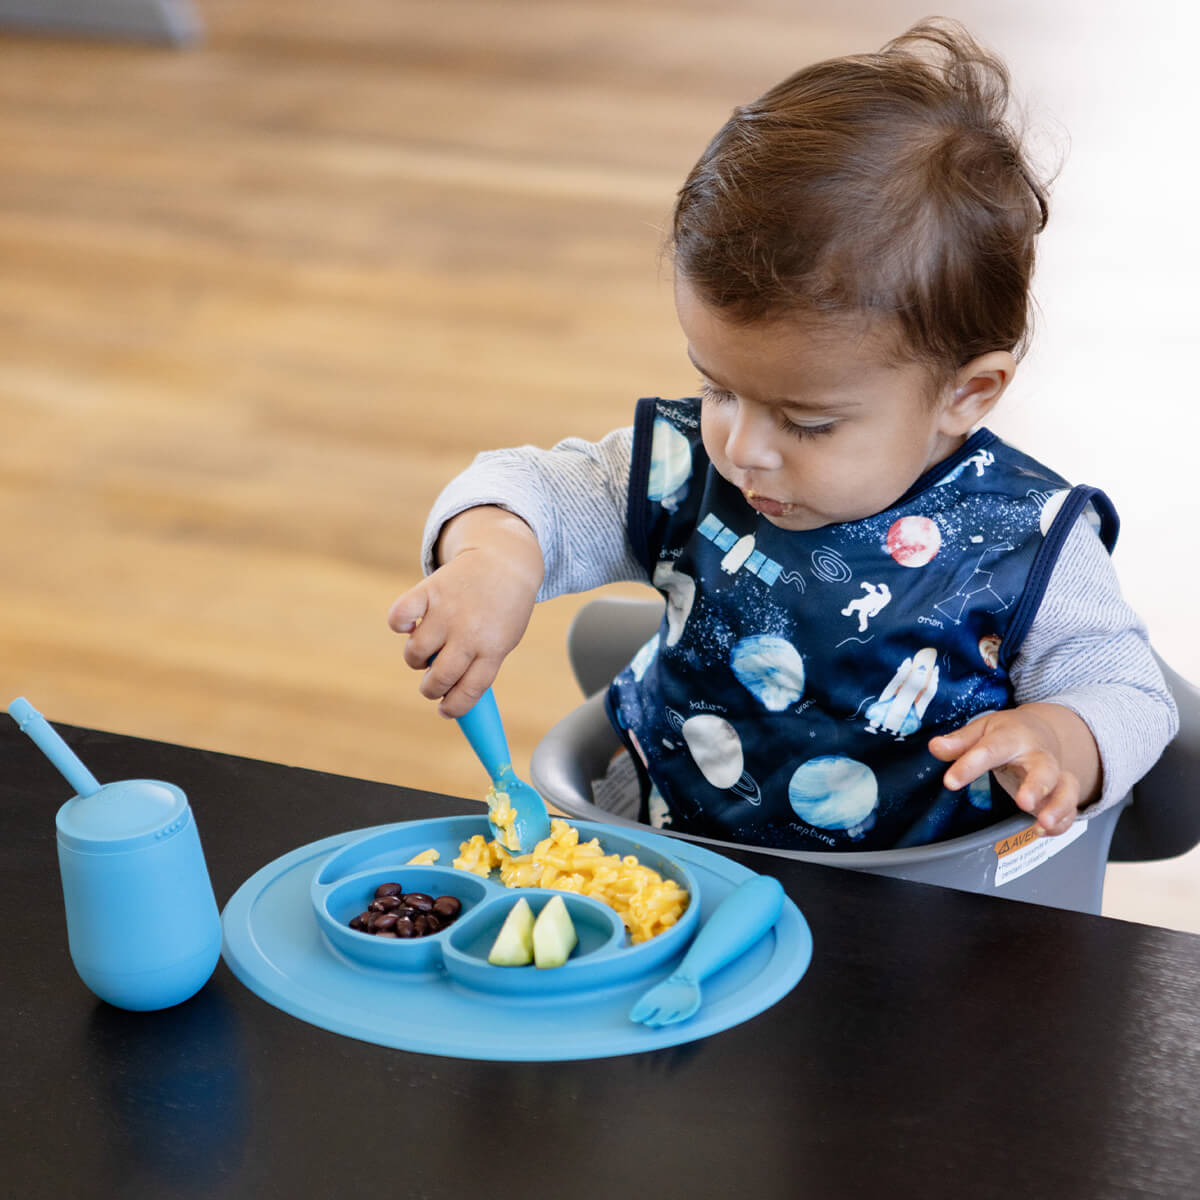 Mini Feeding Set in Blue by ezpz / Silicone Plate, Fork & Spoon for Toddlers